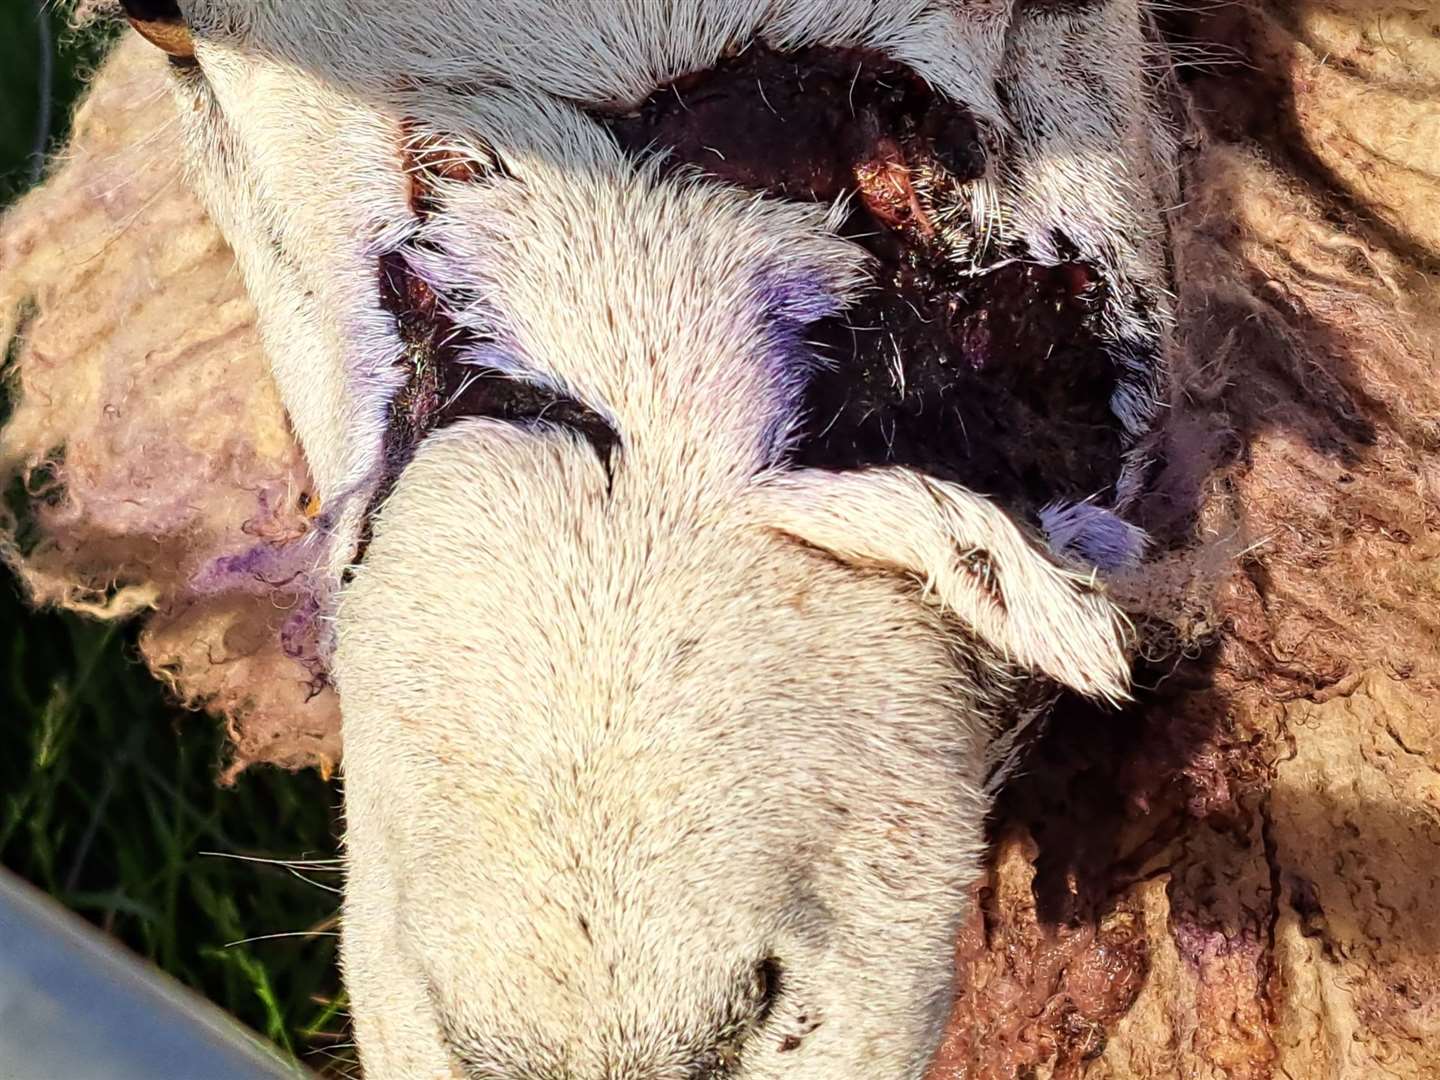 Sheep were left with deep wounds to their faces in a suspected dog attack at Old Romney. Picture: Donna Walker-Hudson